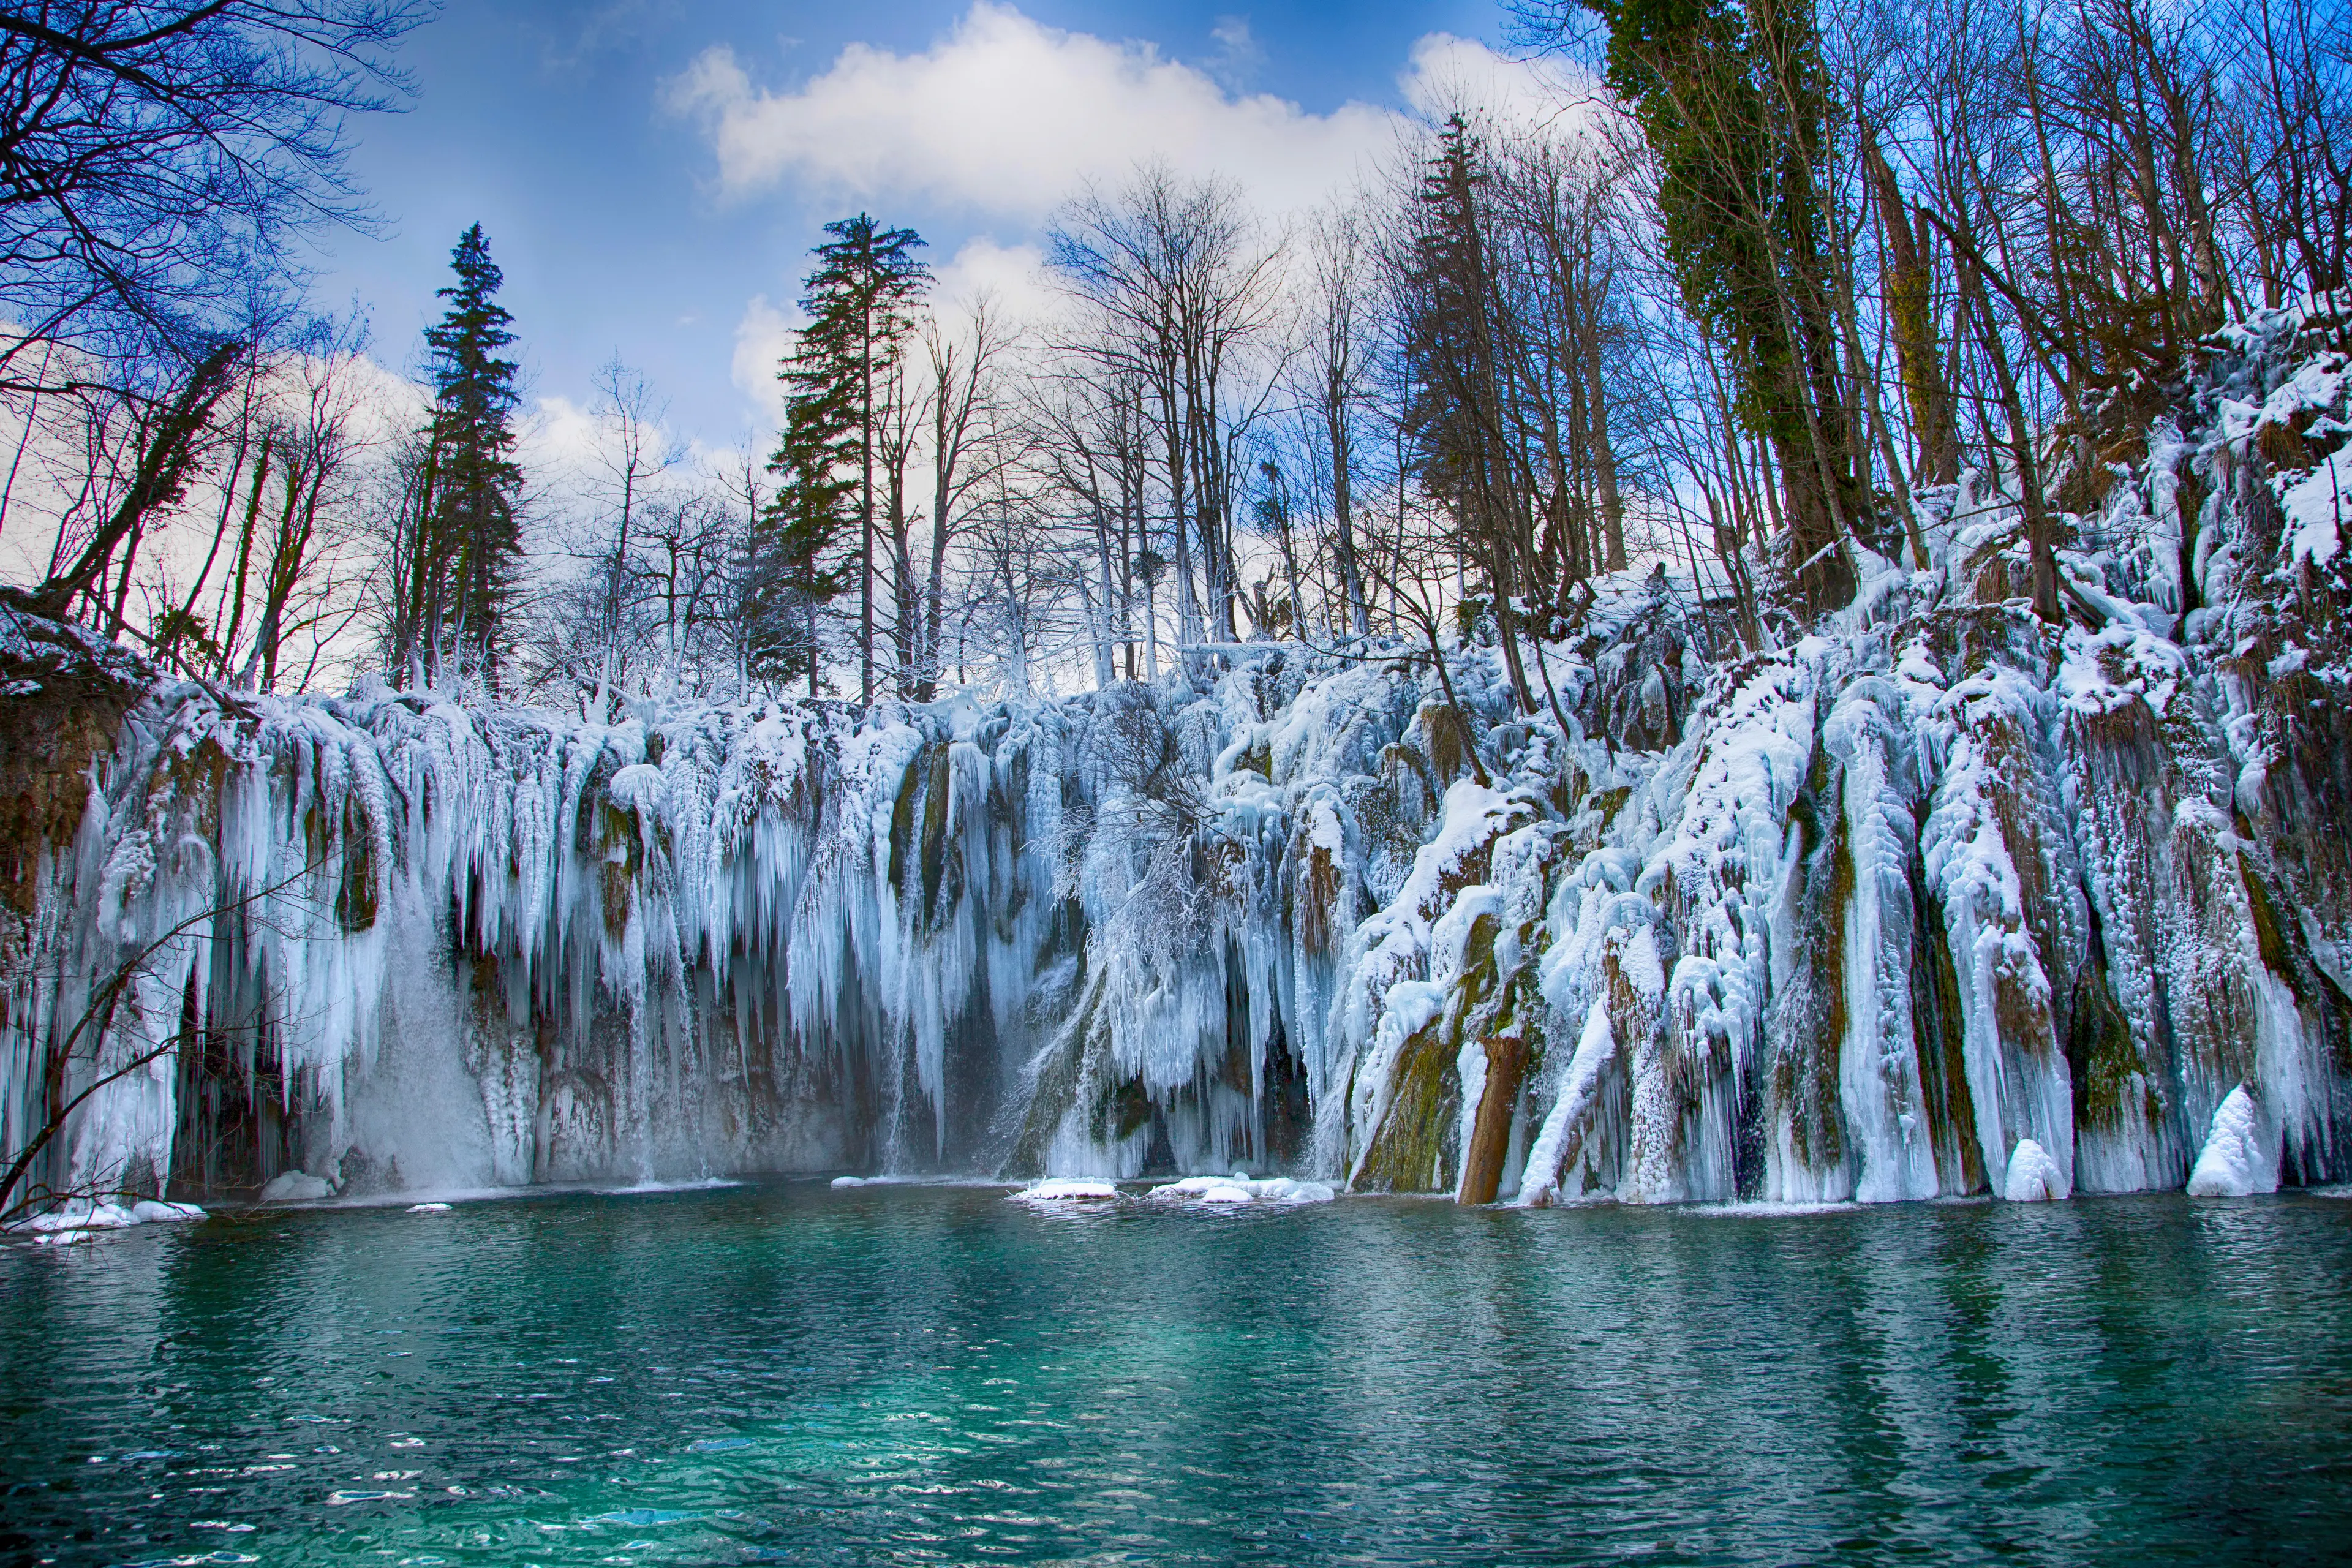 1-Day Adventure & Sightseeing Trip to Plitvice Lakes with Friends